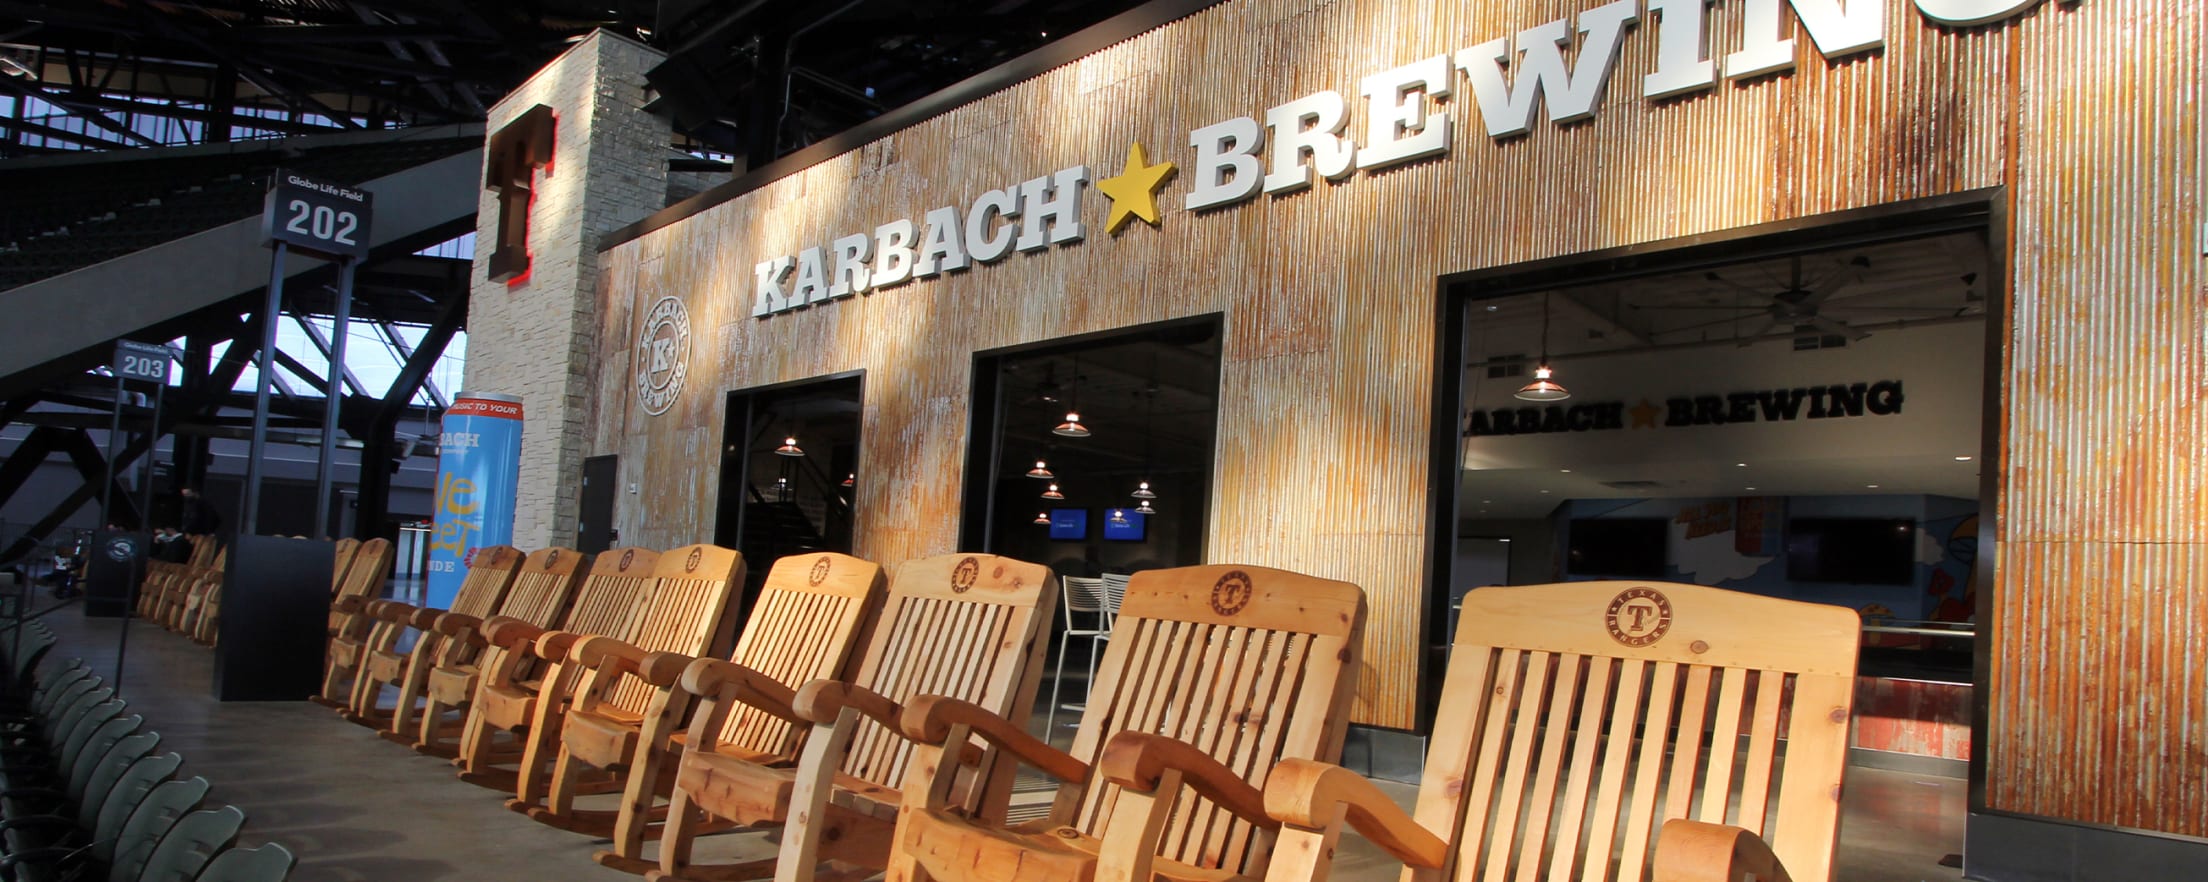 Texas Rangers Wild Rag Deck And Karbach Brewing Sky Porch Rocking Chairs